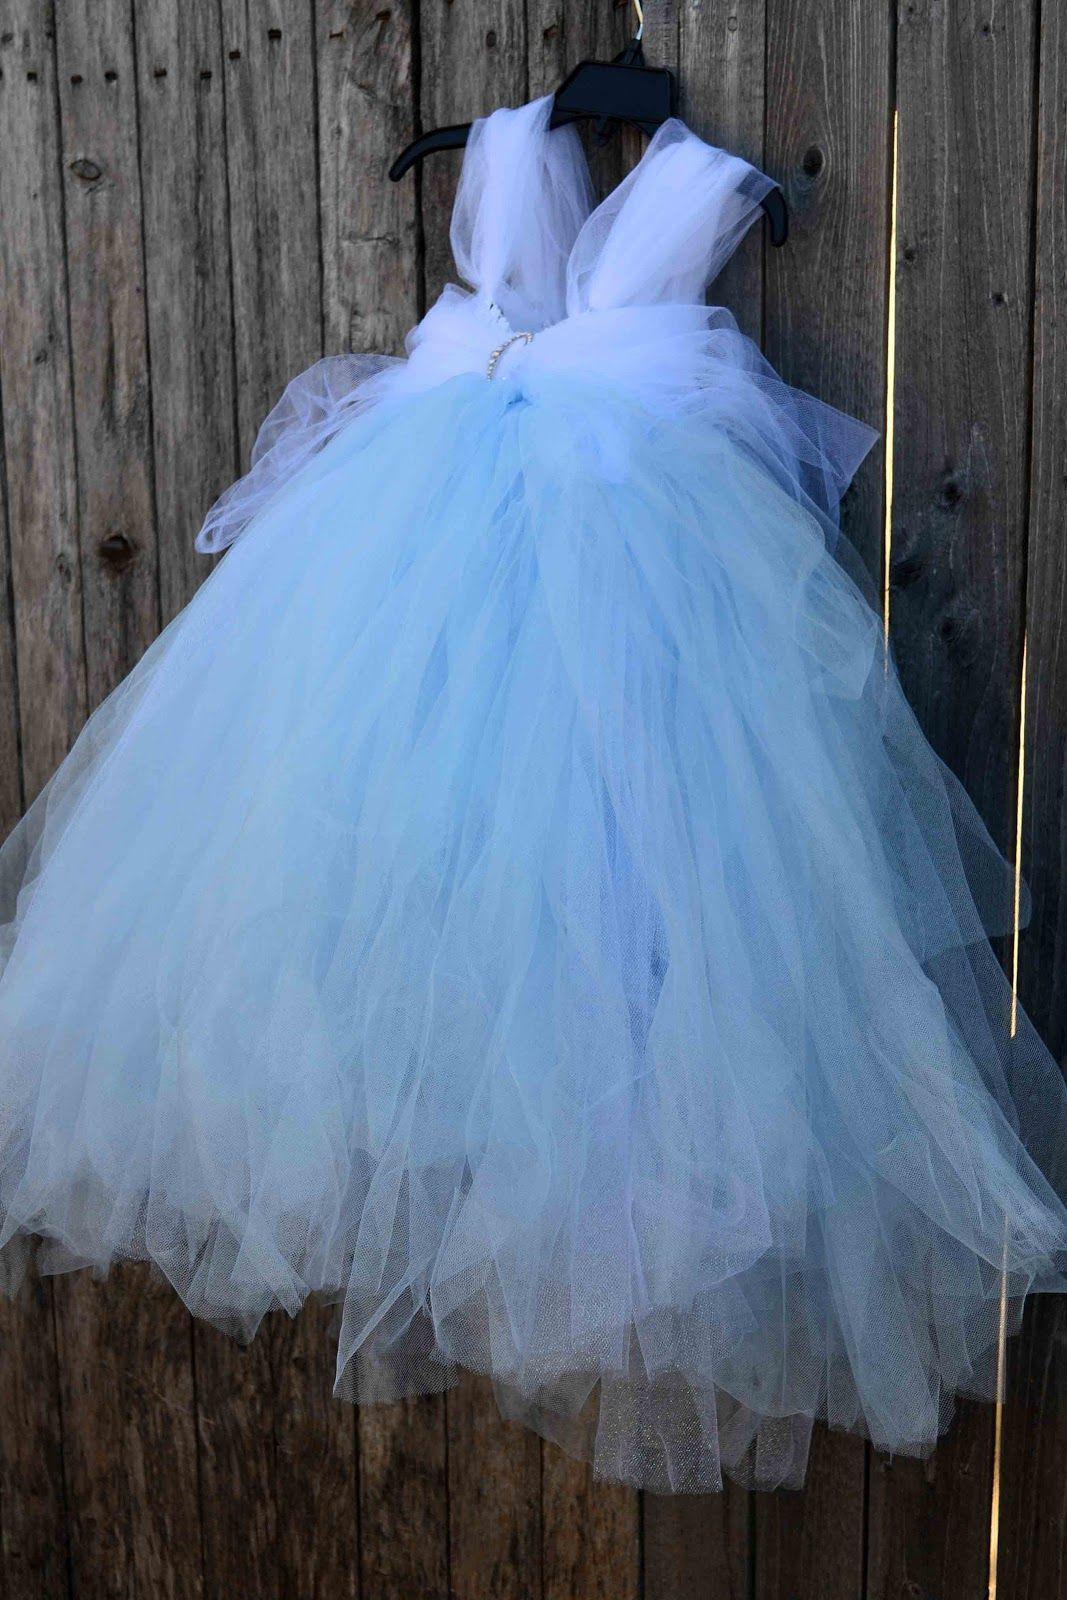 Tulle Dress Toddler DIY
 No Sew Tulle CINDERELLA Dress Maybe I could translate